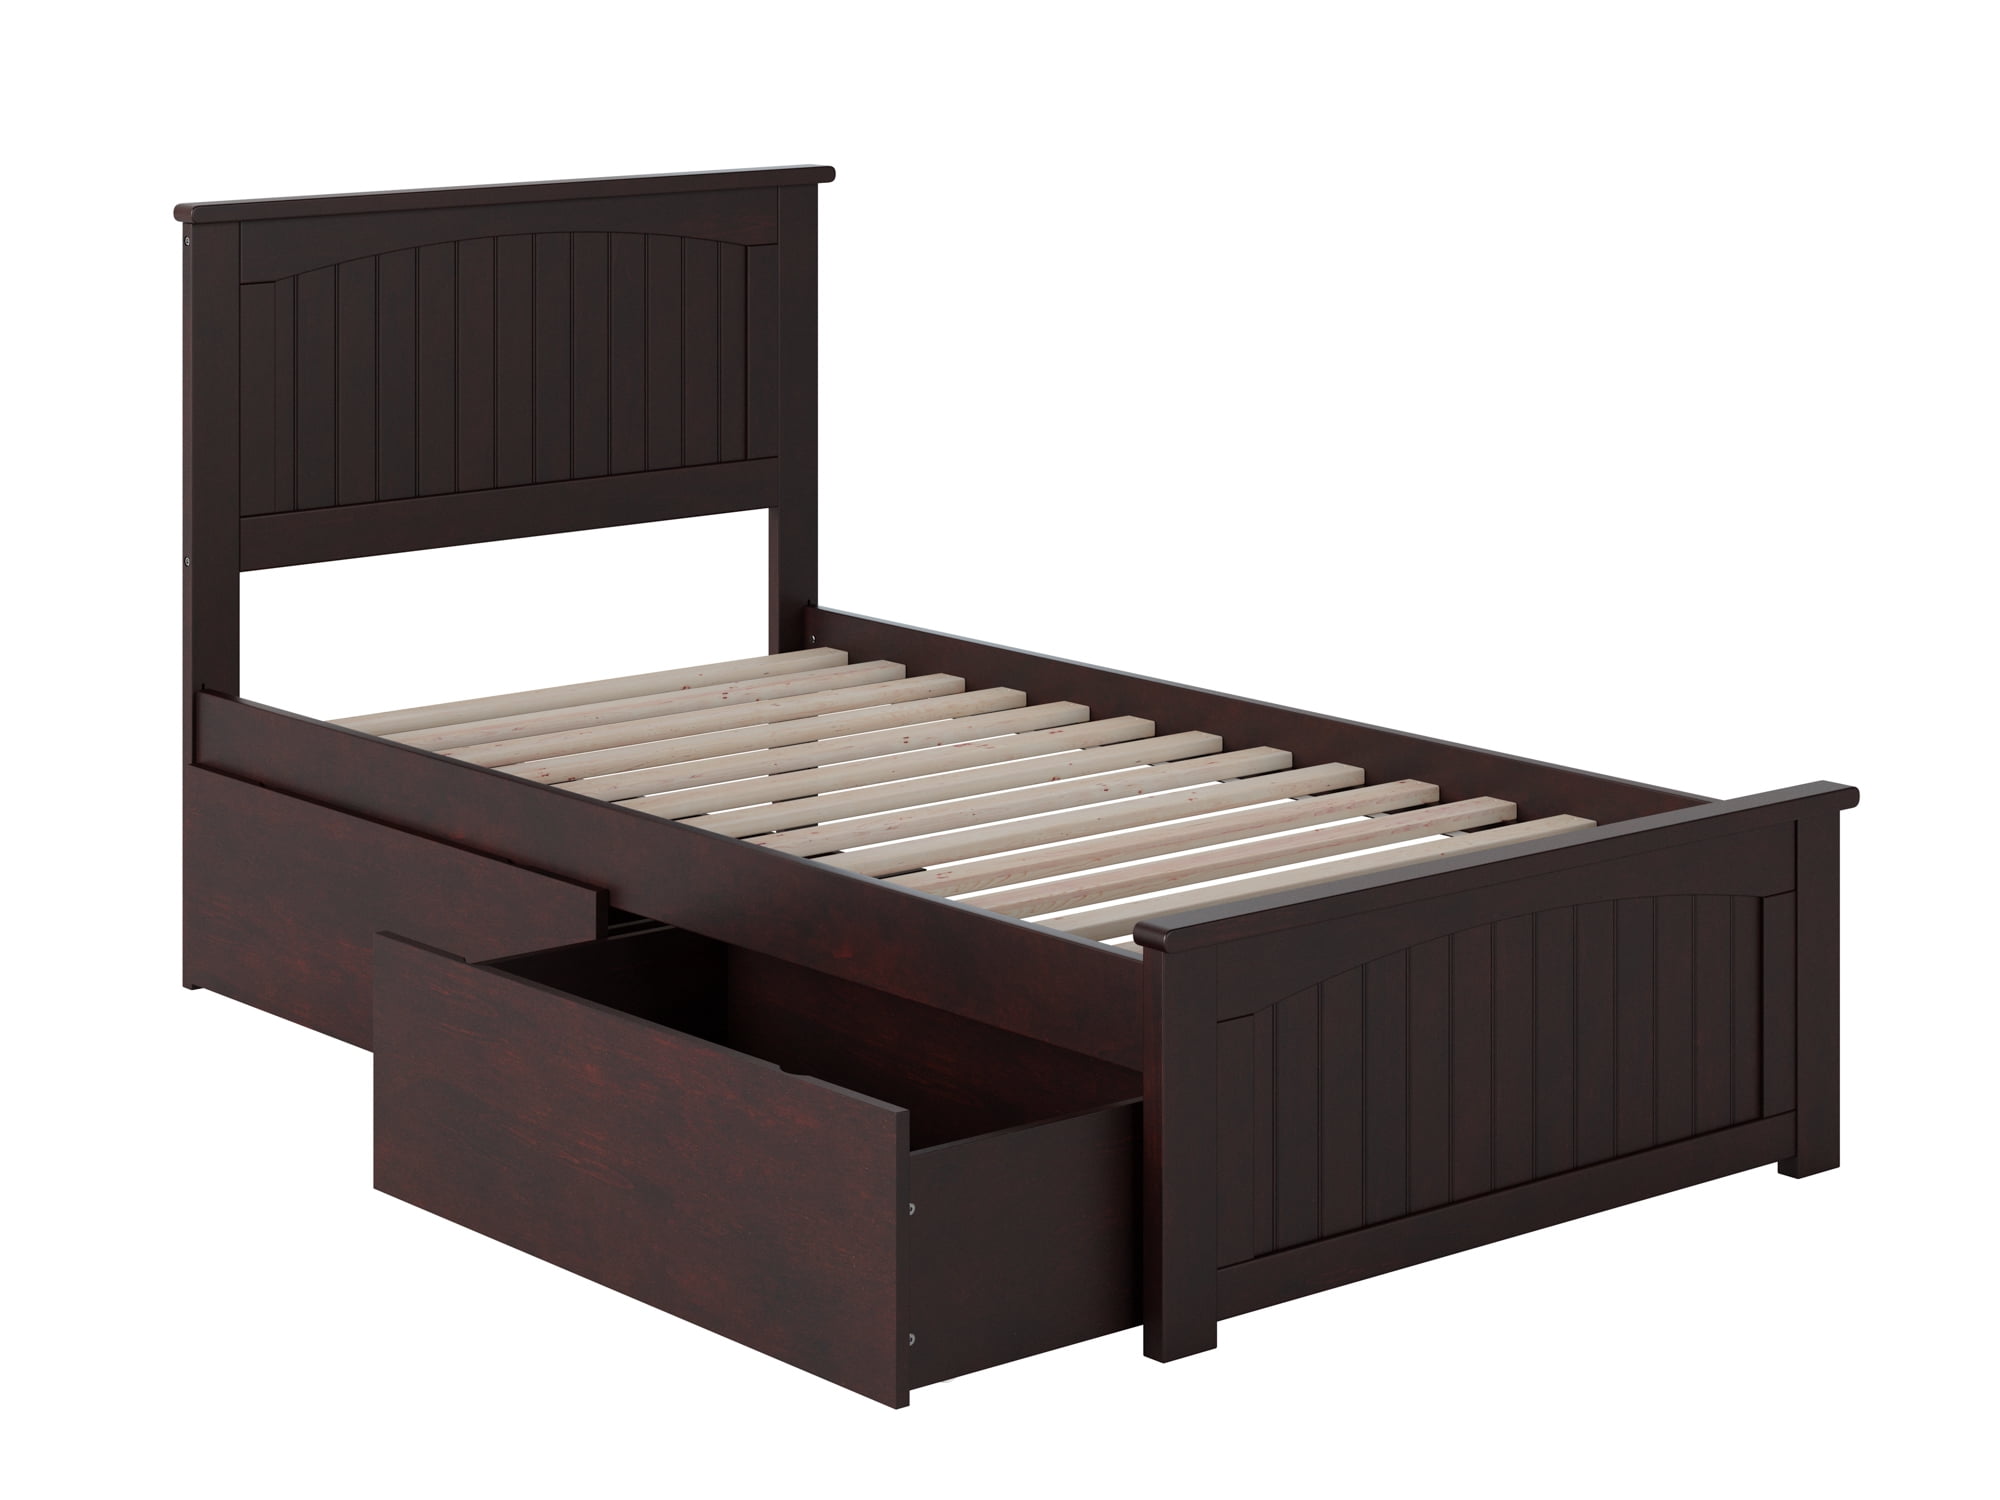 Picture of Atlantic Furniture AR8226111 Nantucket Match Foot Board with Urban Bed Drawers, Espresso - Twin